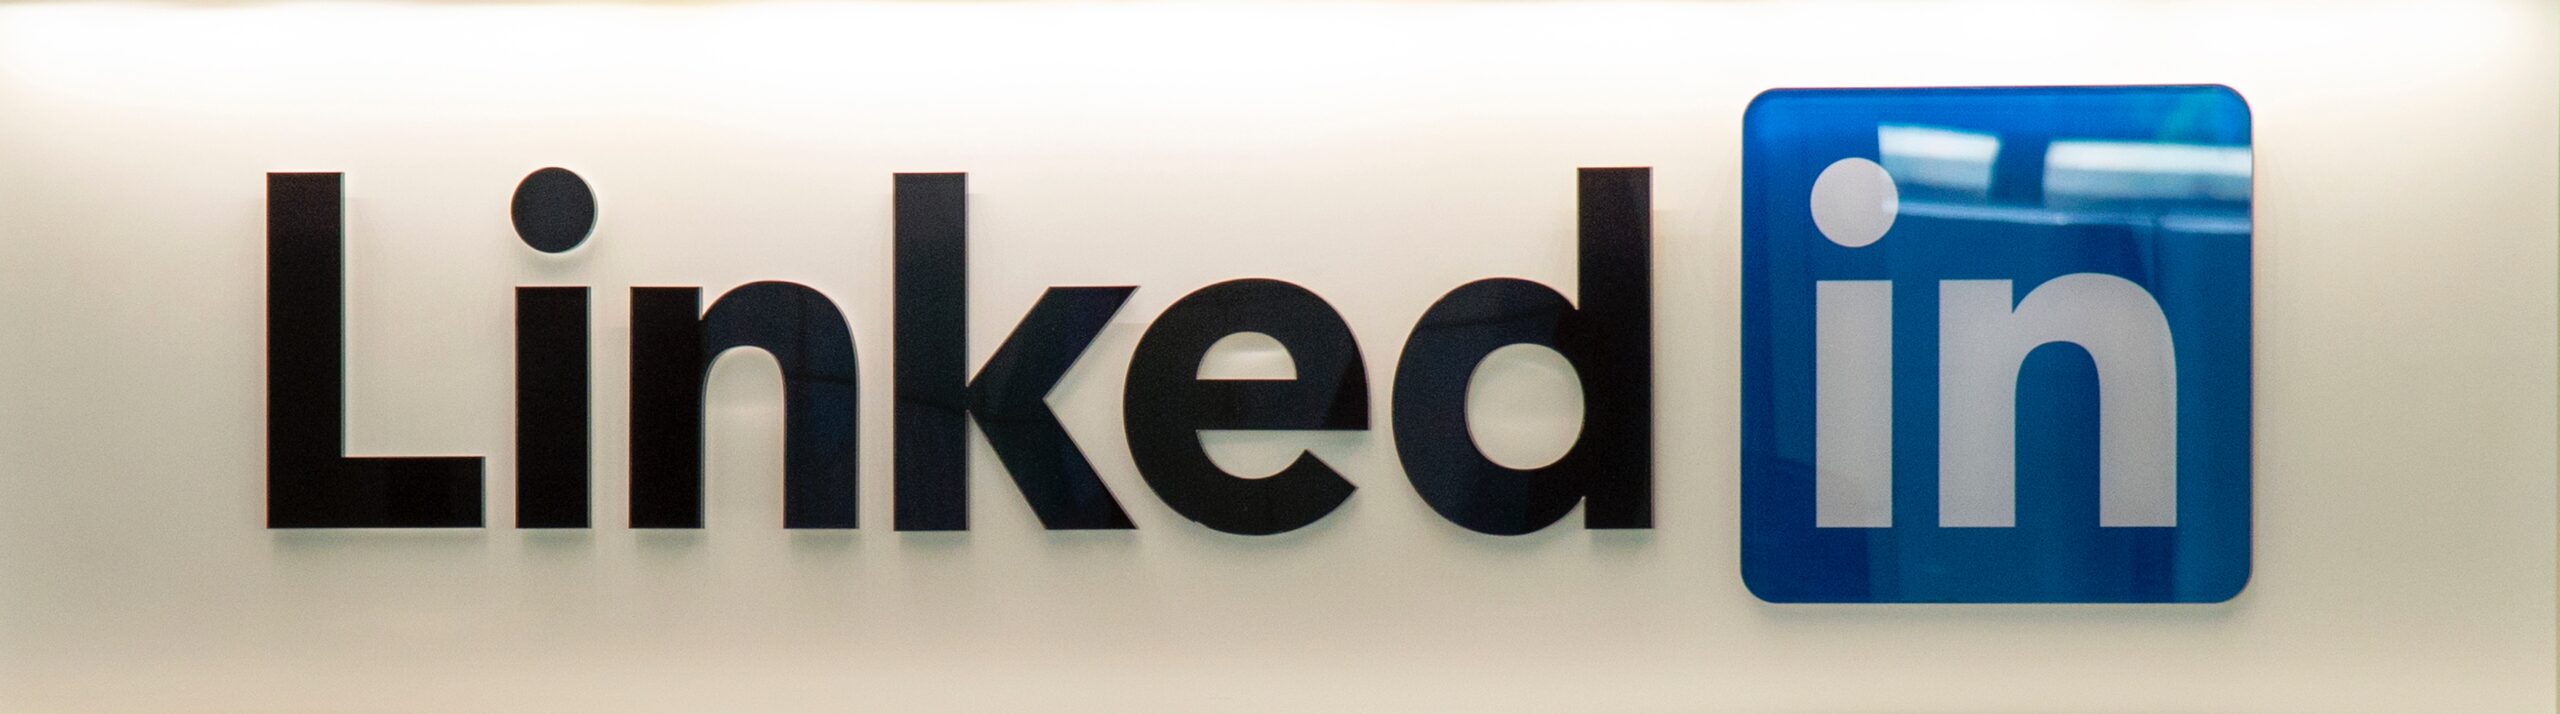 LinkedIn breach with 92% of users’ data exposed